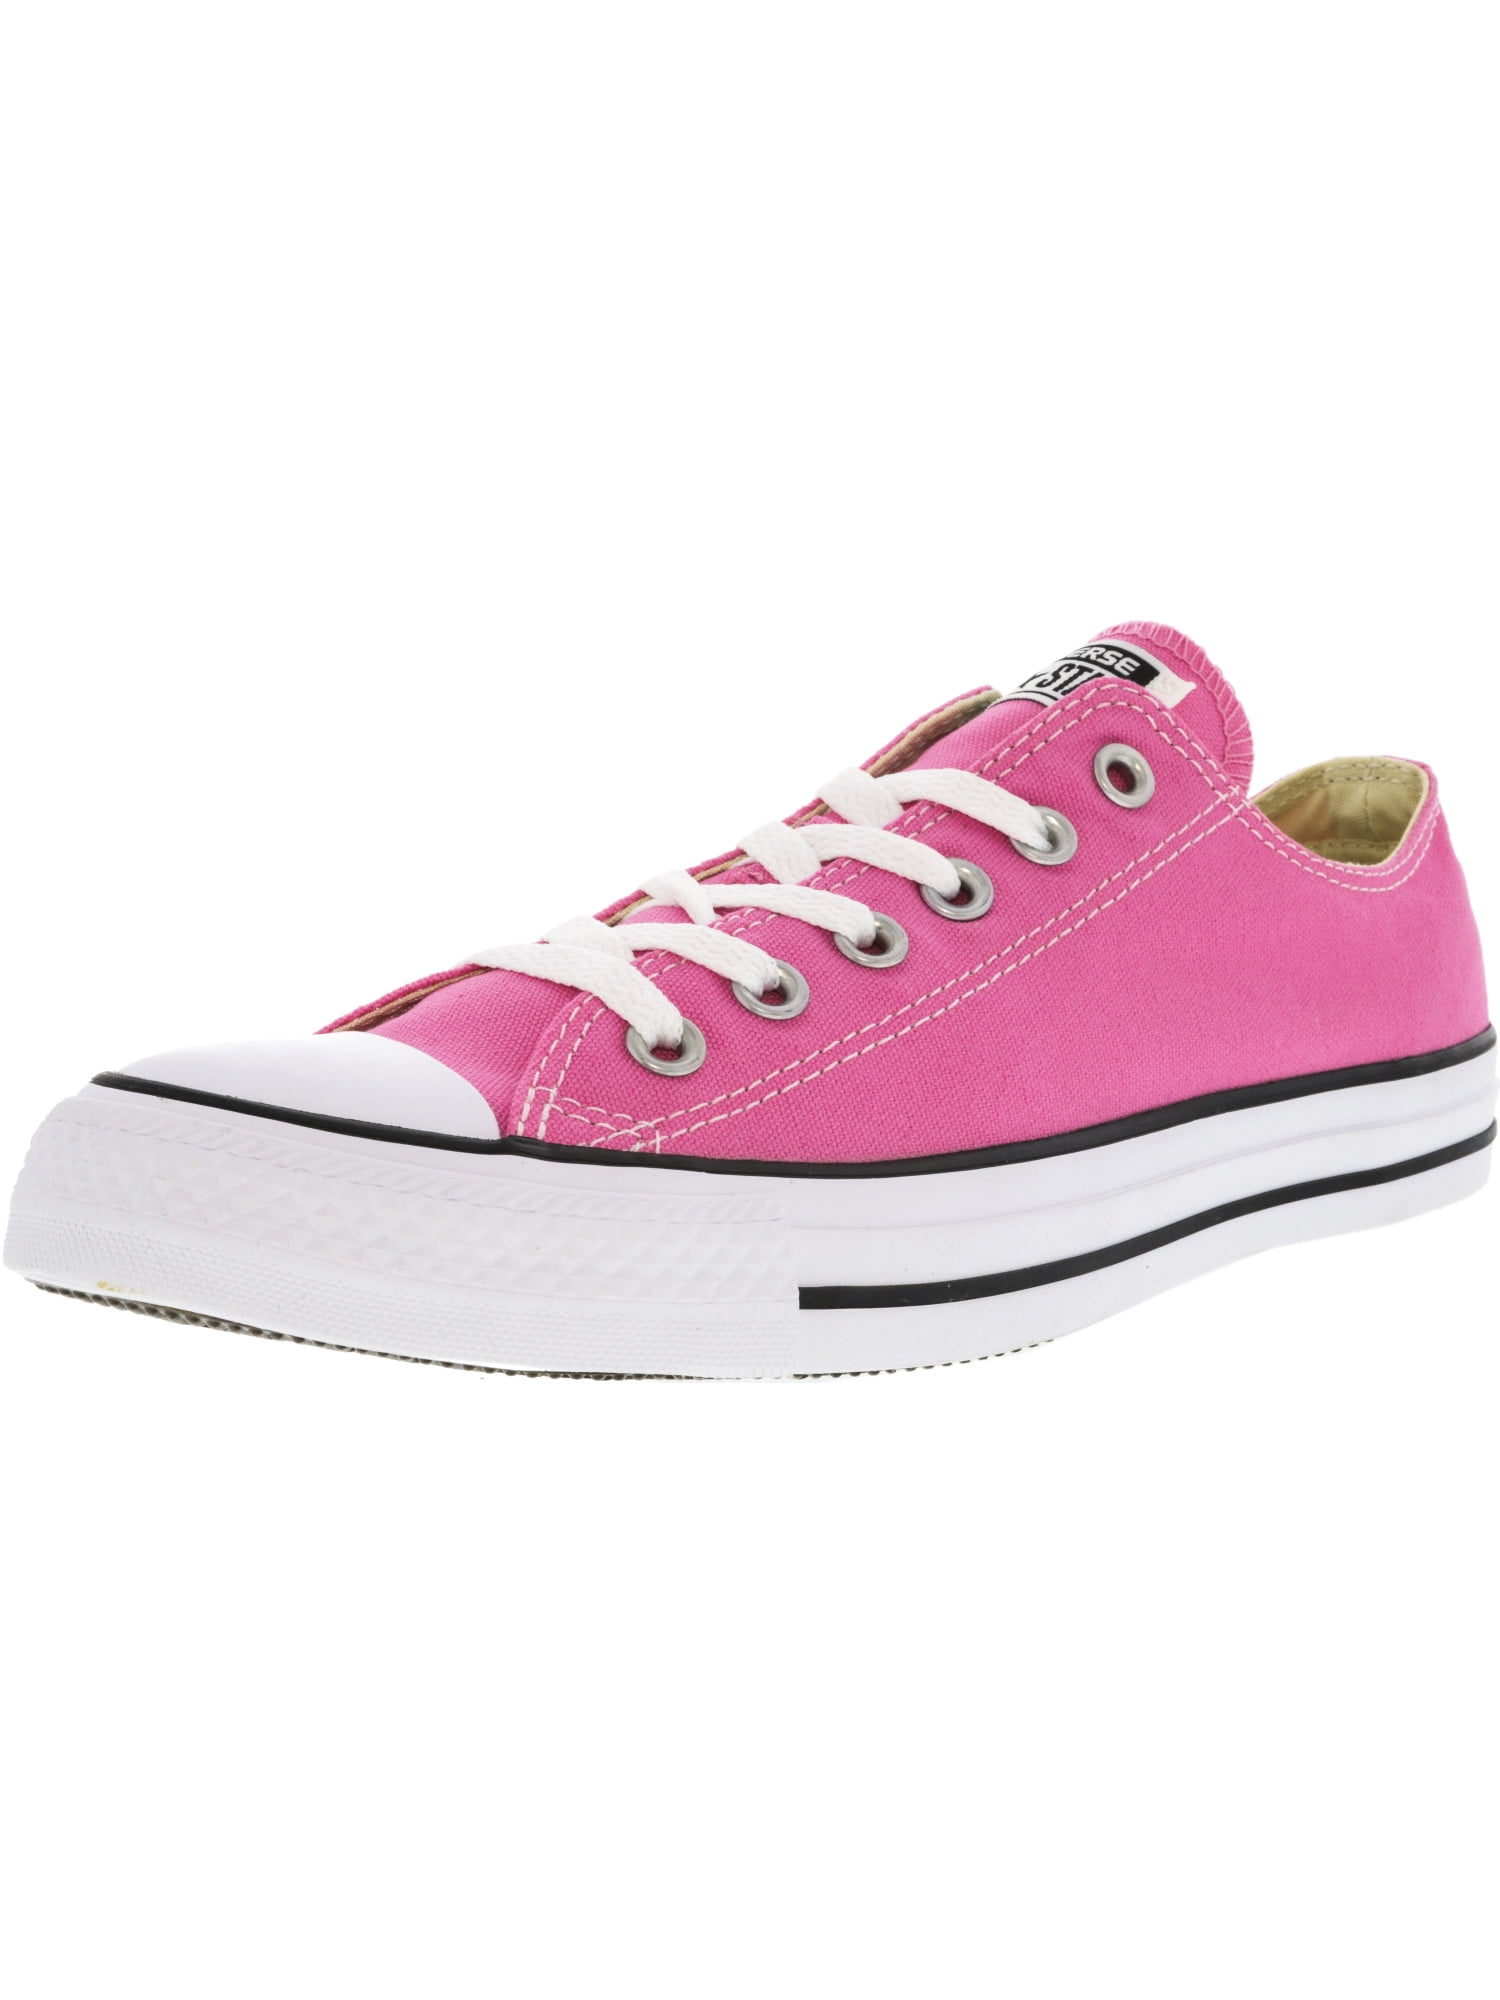 mens pink converse size 12